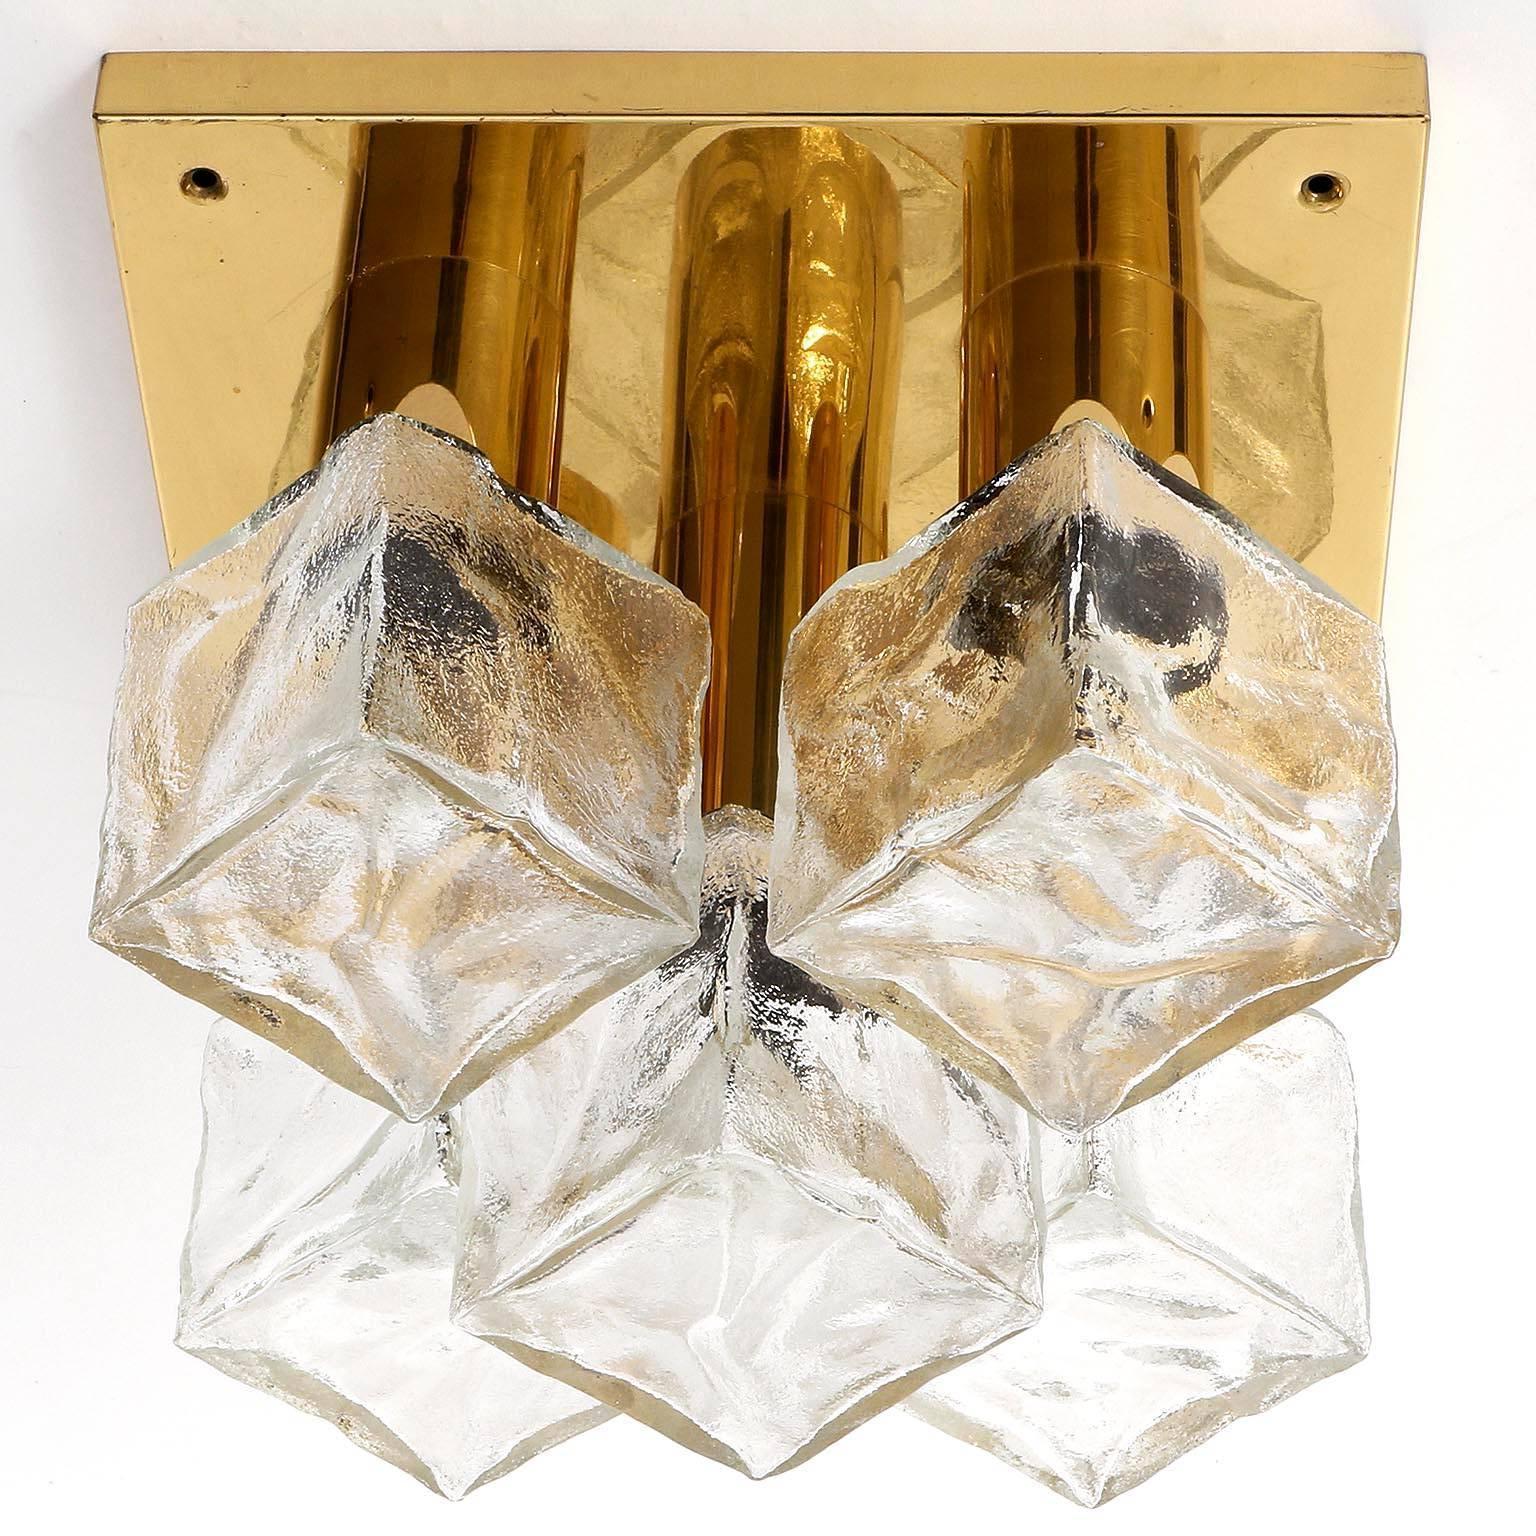 One of four modulare and square light fixtures model 'Cubus' (German 'Würfel') by Kalmar, Austria, manufactured in Mid-Century, circa 1970 (late 1960s or early 1970s).
They are made of polished brass and frosted cubic glasses. Each fixture has five